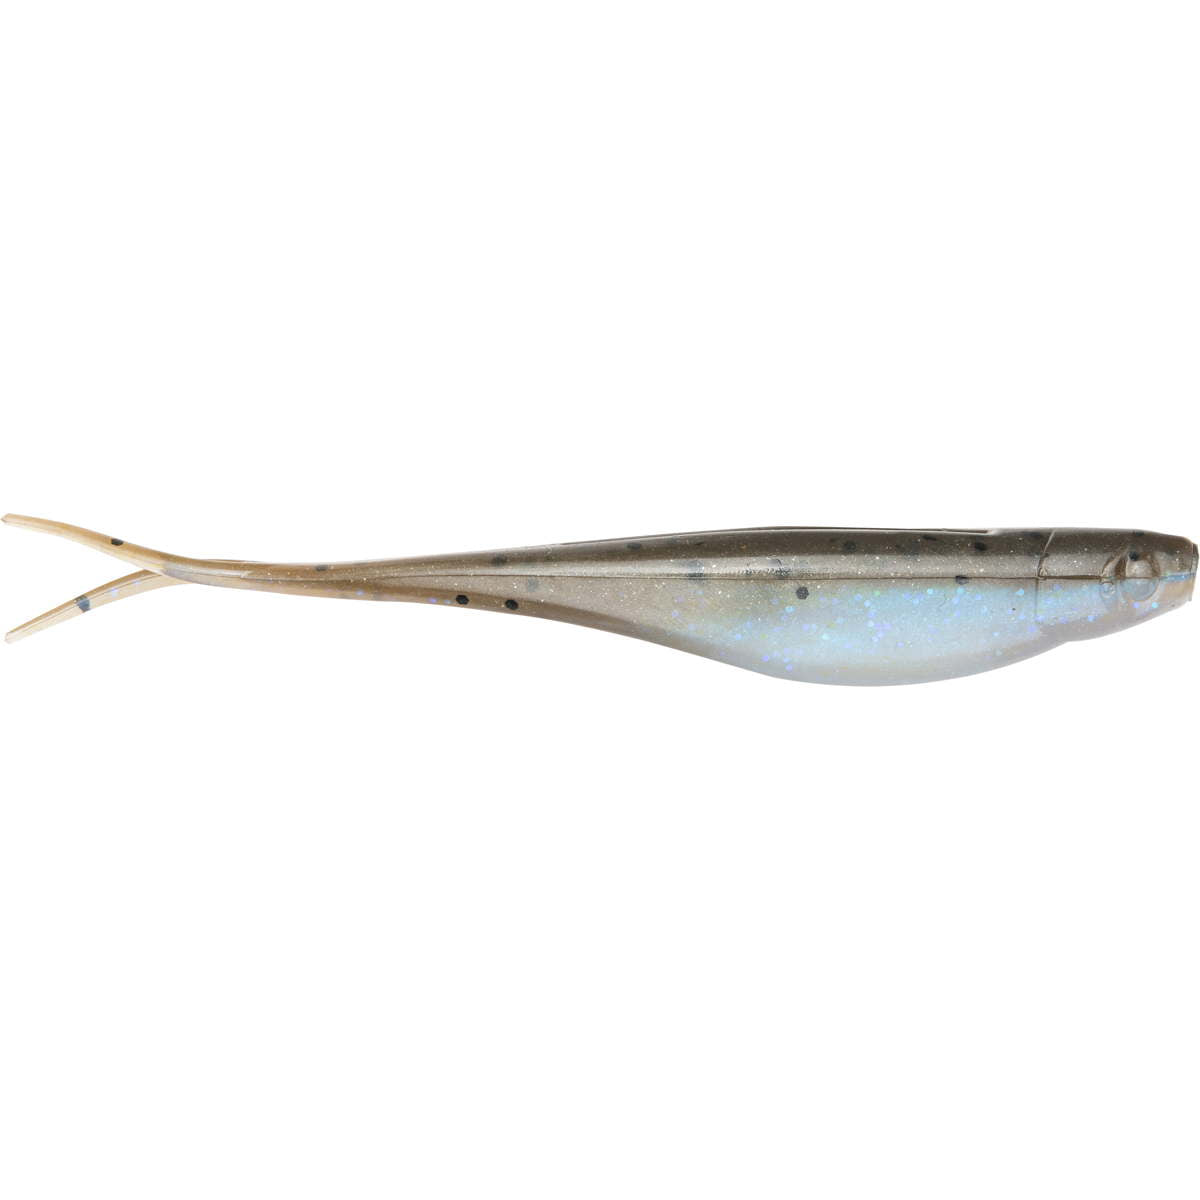 Photo of Strike King 3X Z-Too Soft Jerkbait for sale at United Tackle Shops.